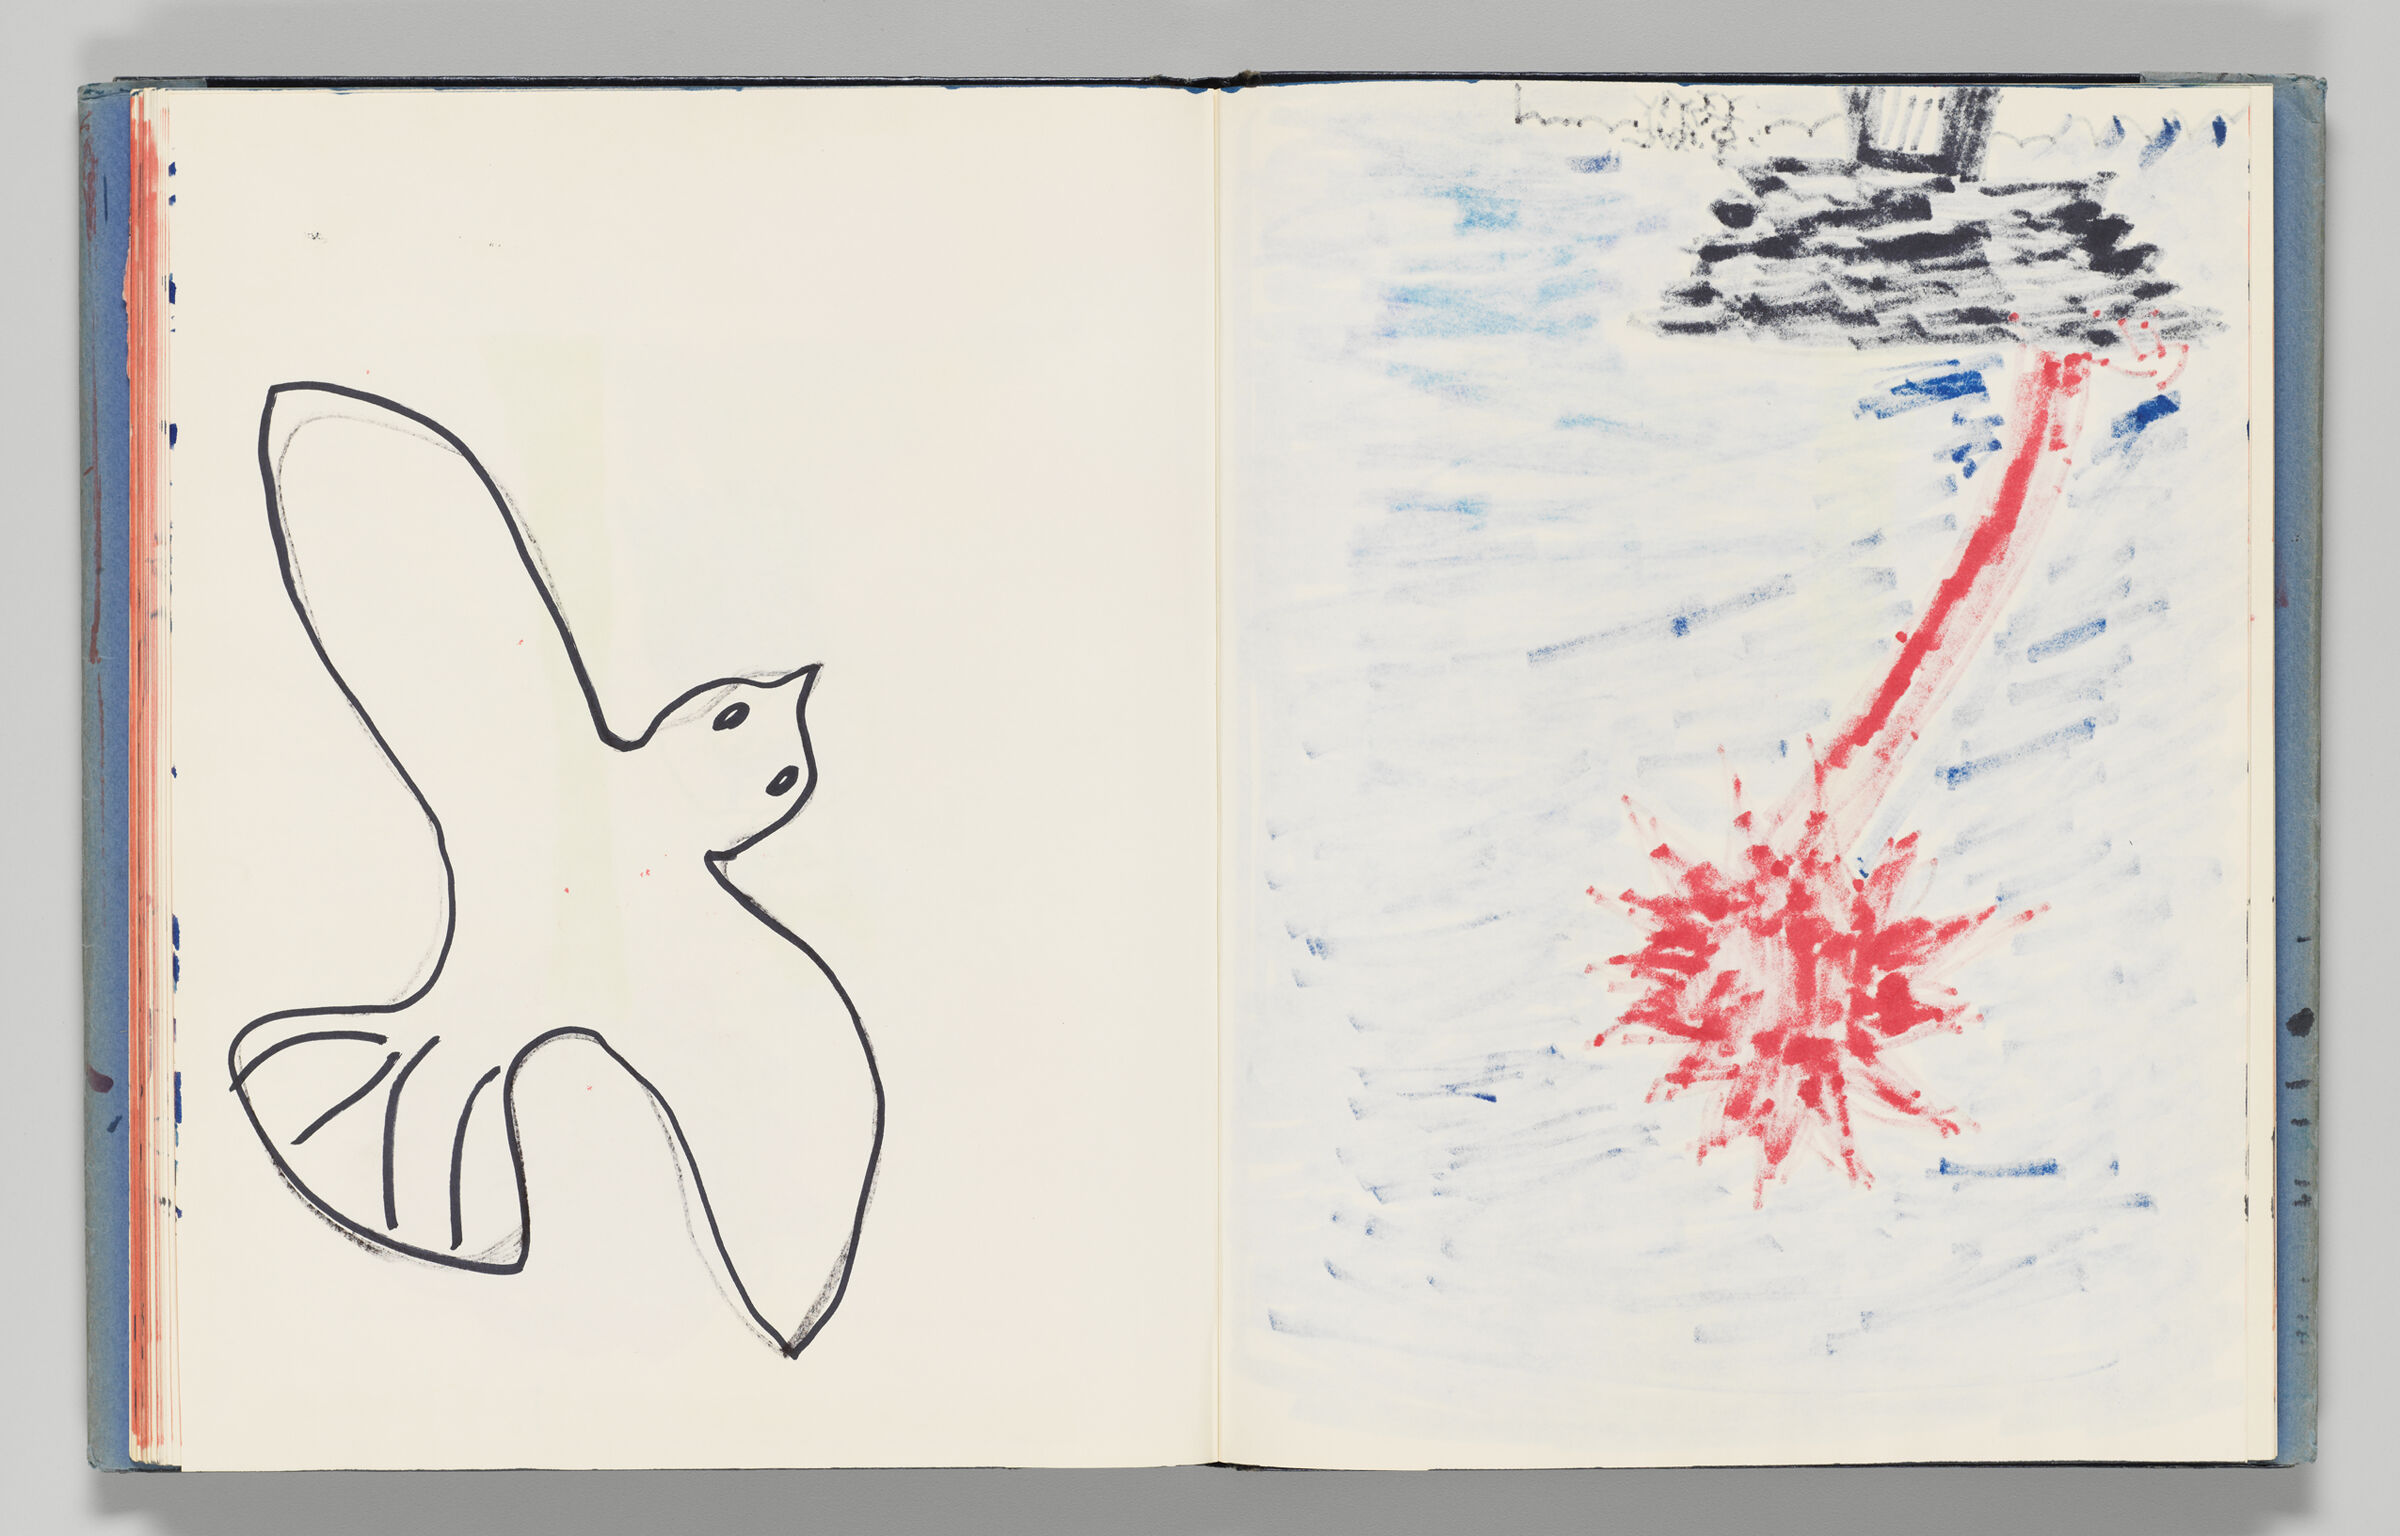 Untitled (Sketch Of A Bird By Artist's Daughter, Left Page); Untitled (Bleed-Through, Right Page)